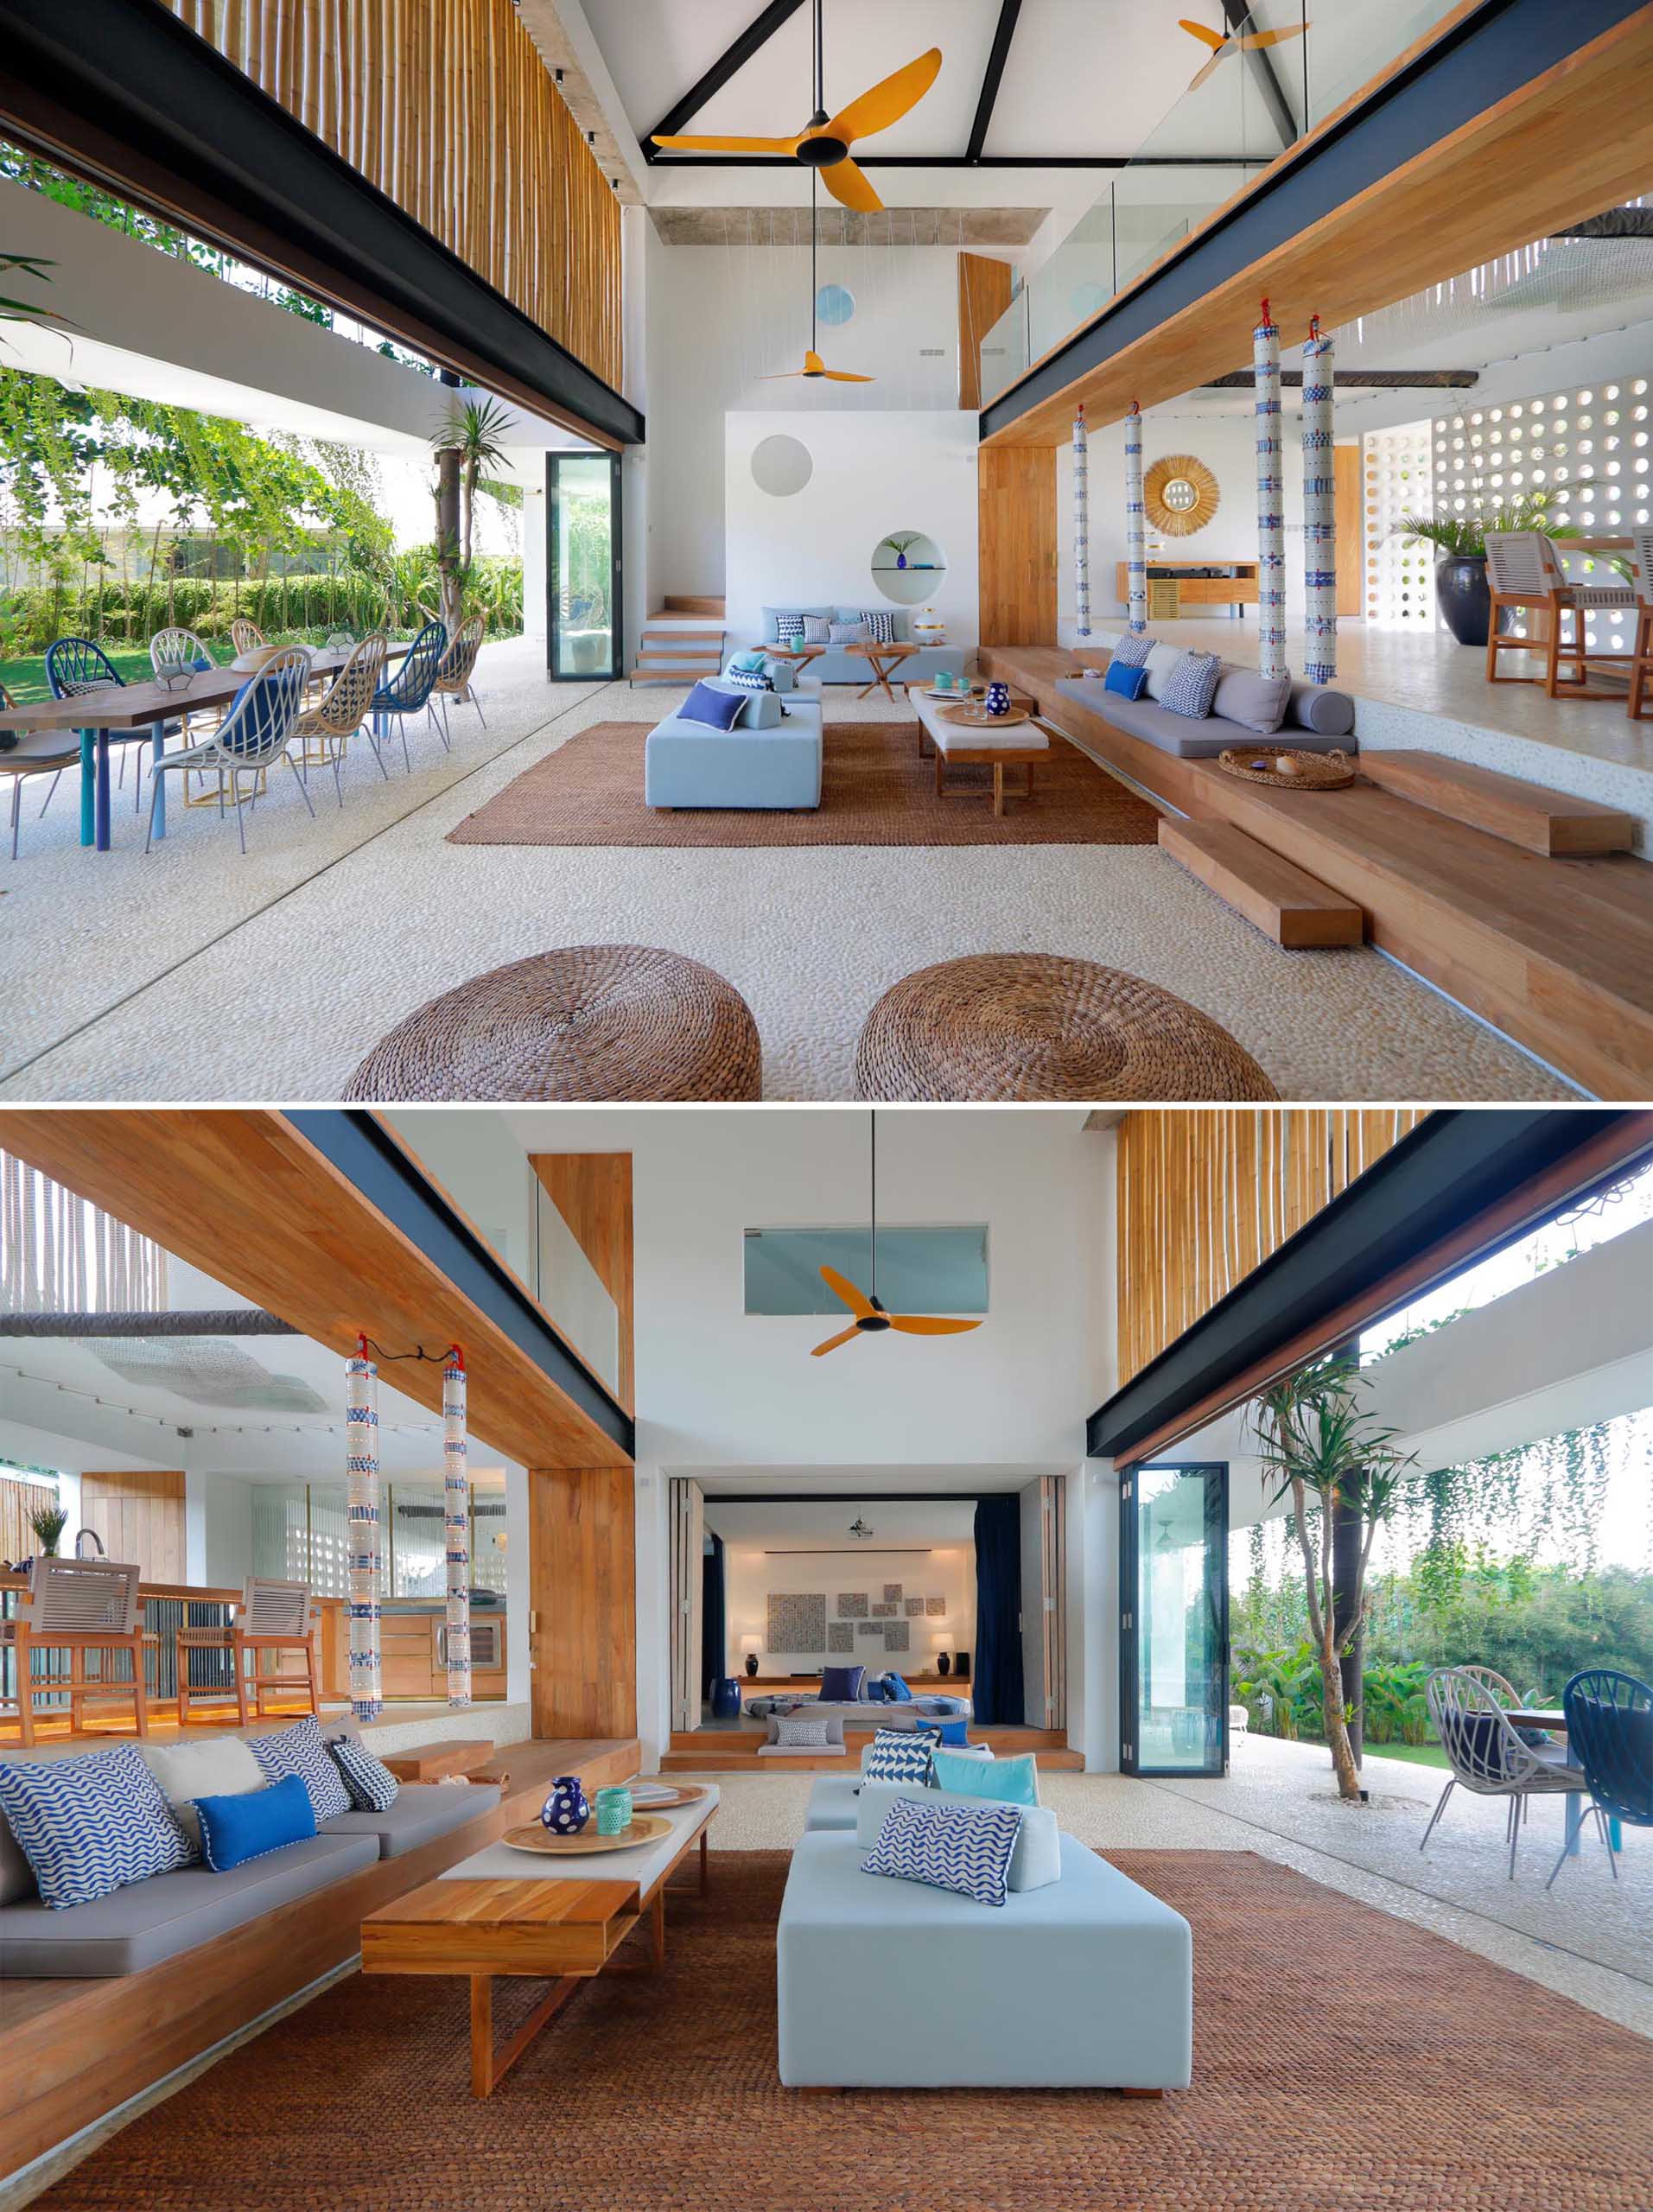 A modern beach house interior with an open living room and double height ceiling.